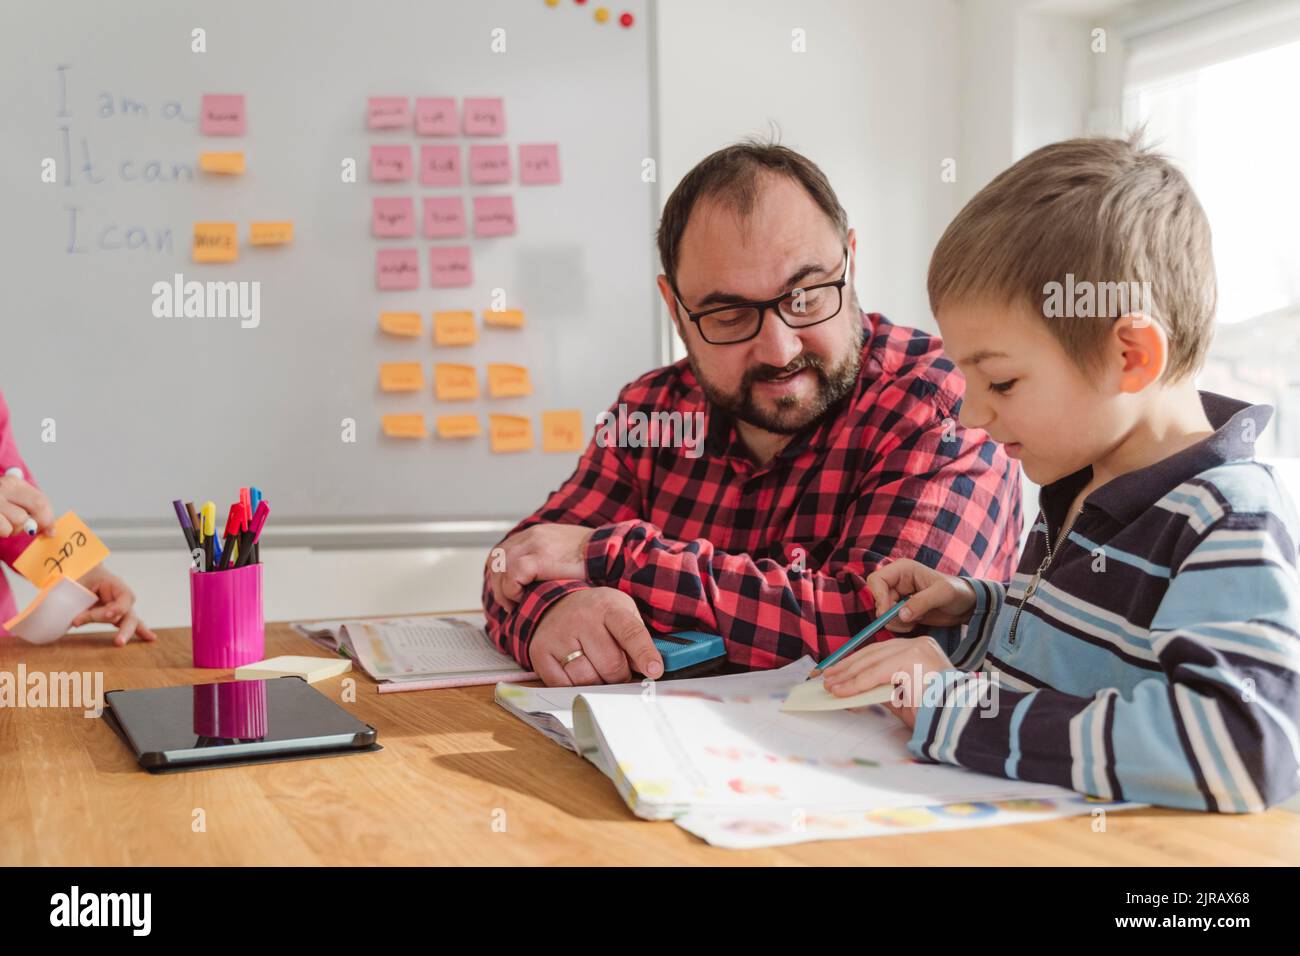 Boy with book learning English language from teacher at home Stock Photo